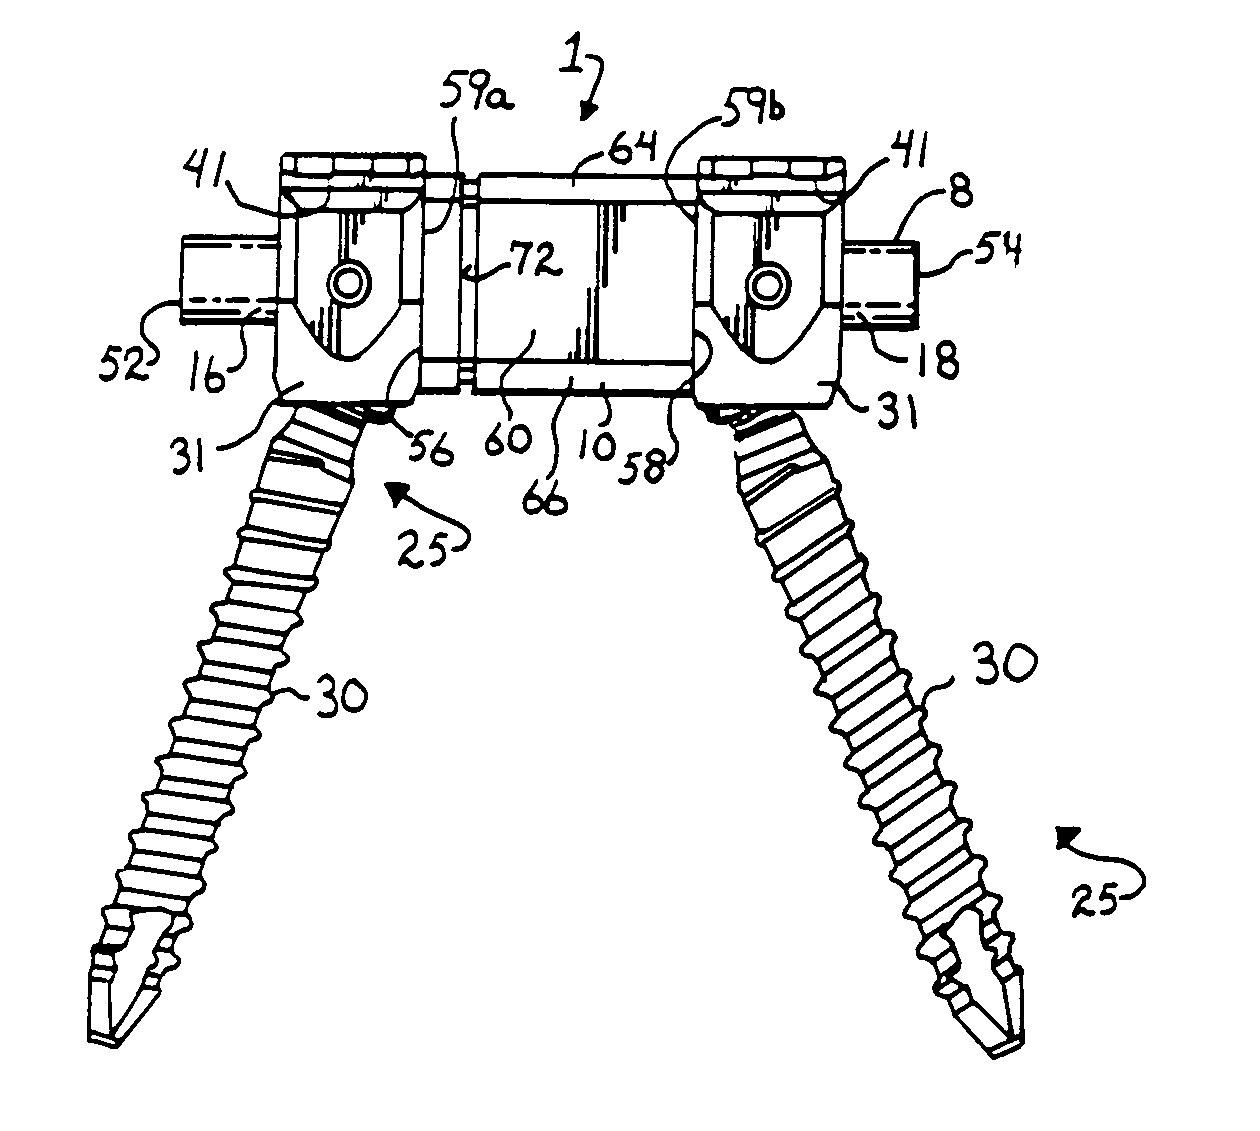 Dynamic stabilization connecting member with elastic core and outer sleeve